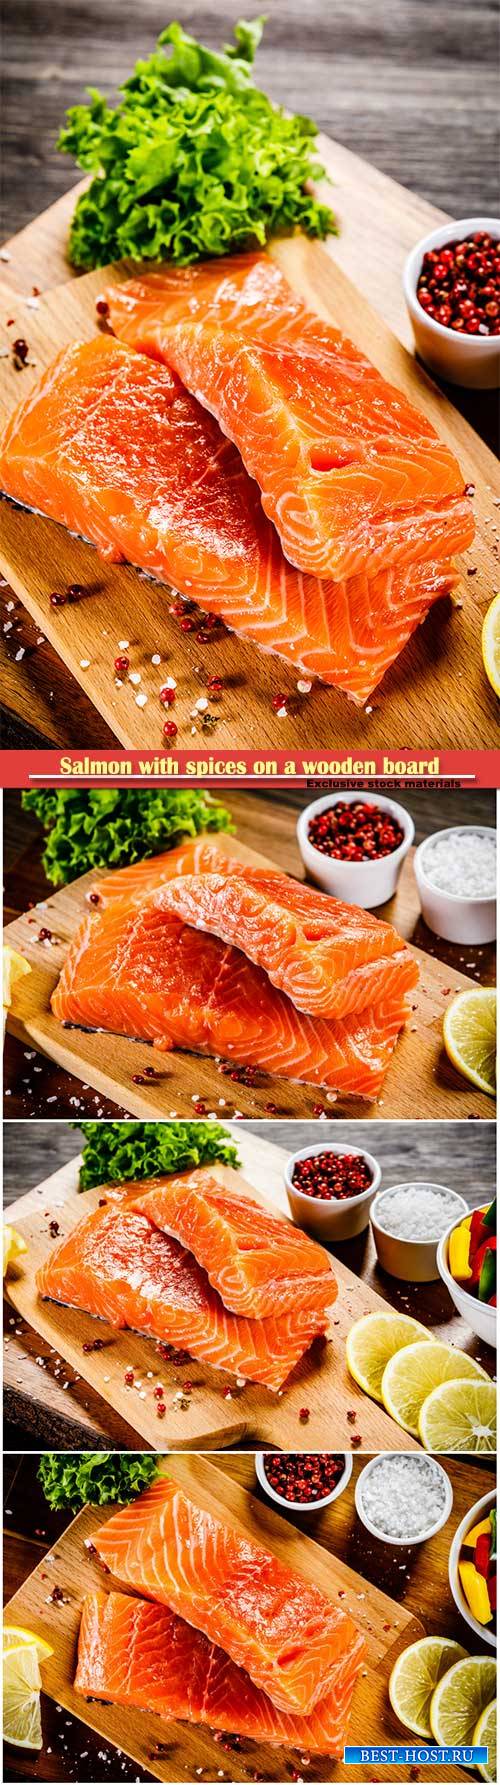 Salmon with spices on a wooden board